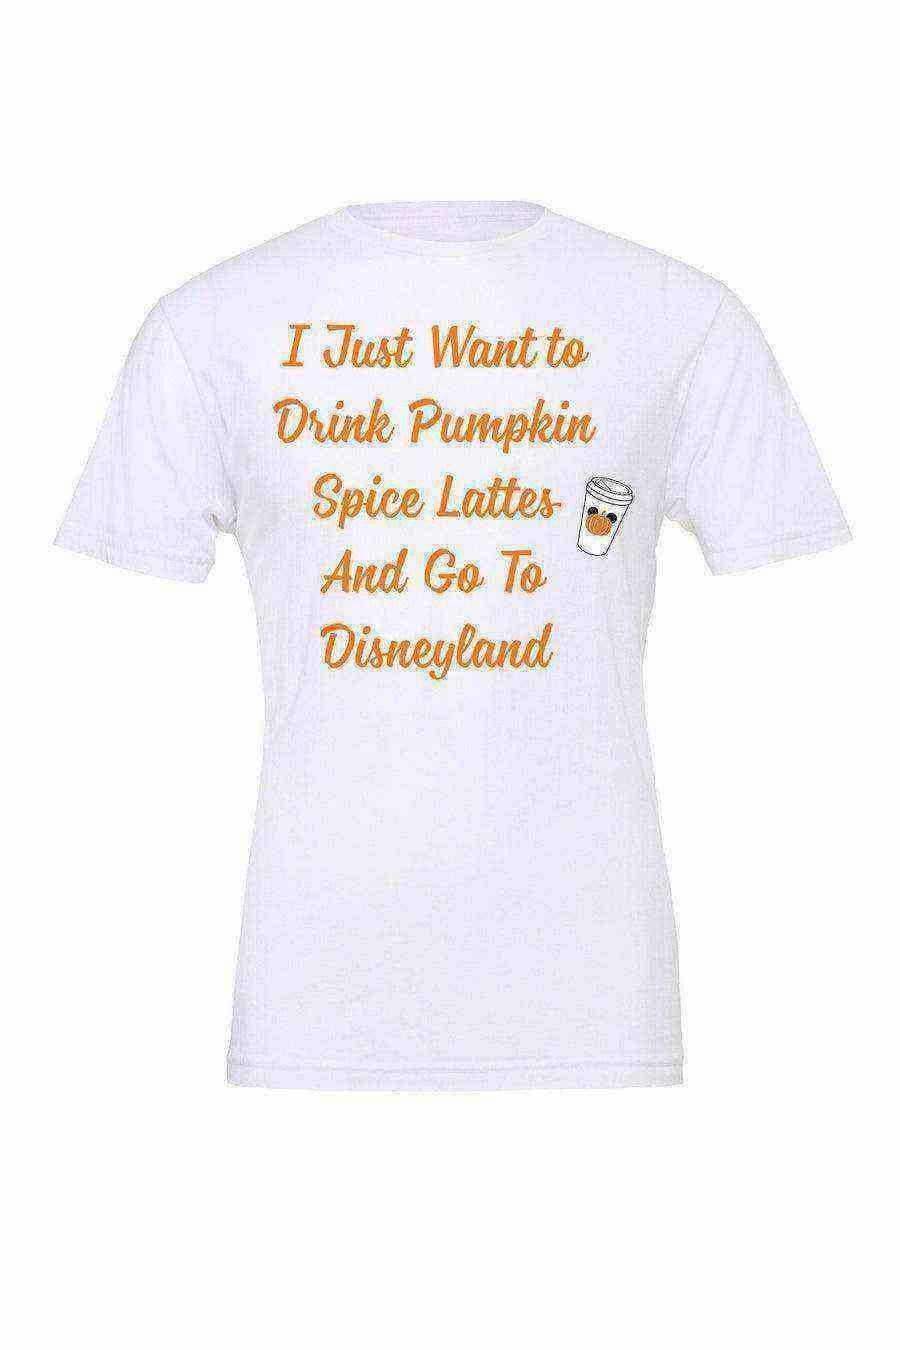 I Just Want To Drink Pumpkin Spice Lattes - Dylan's Tees